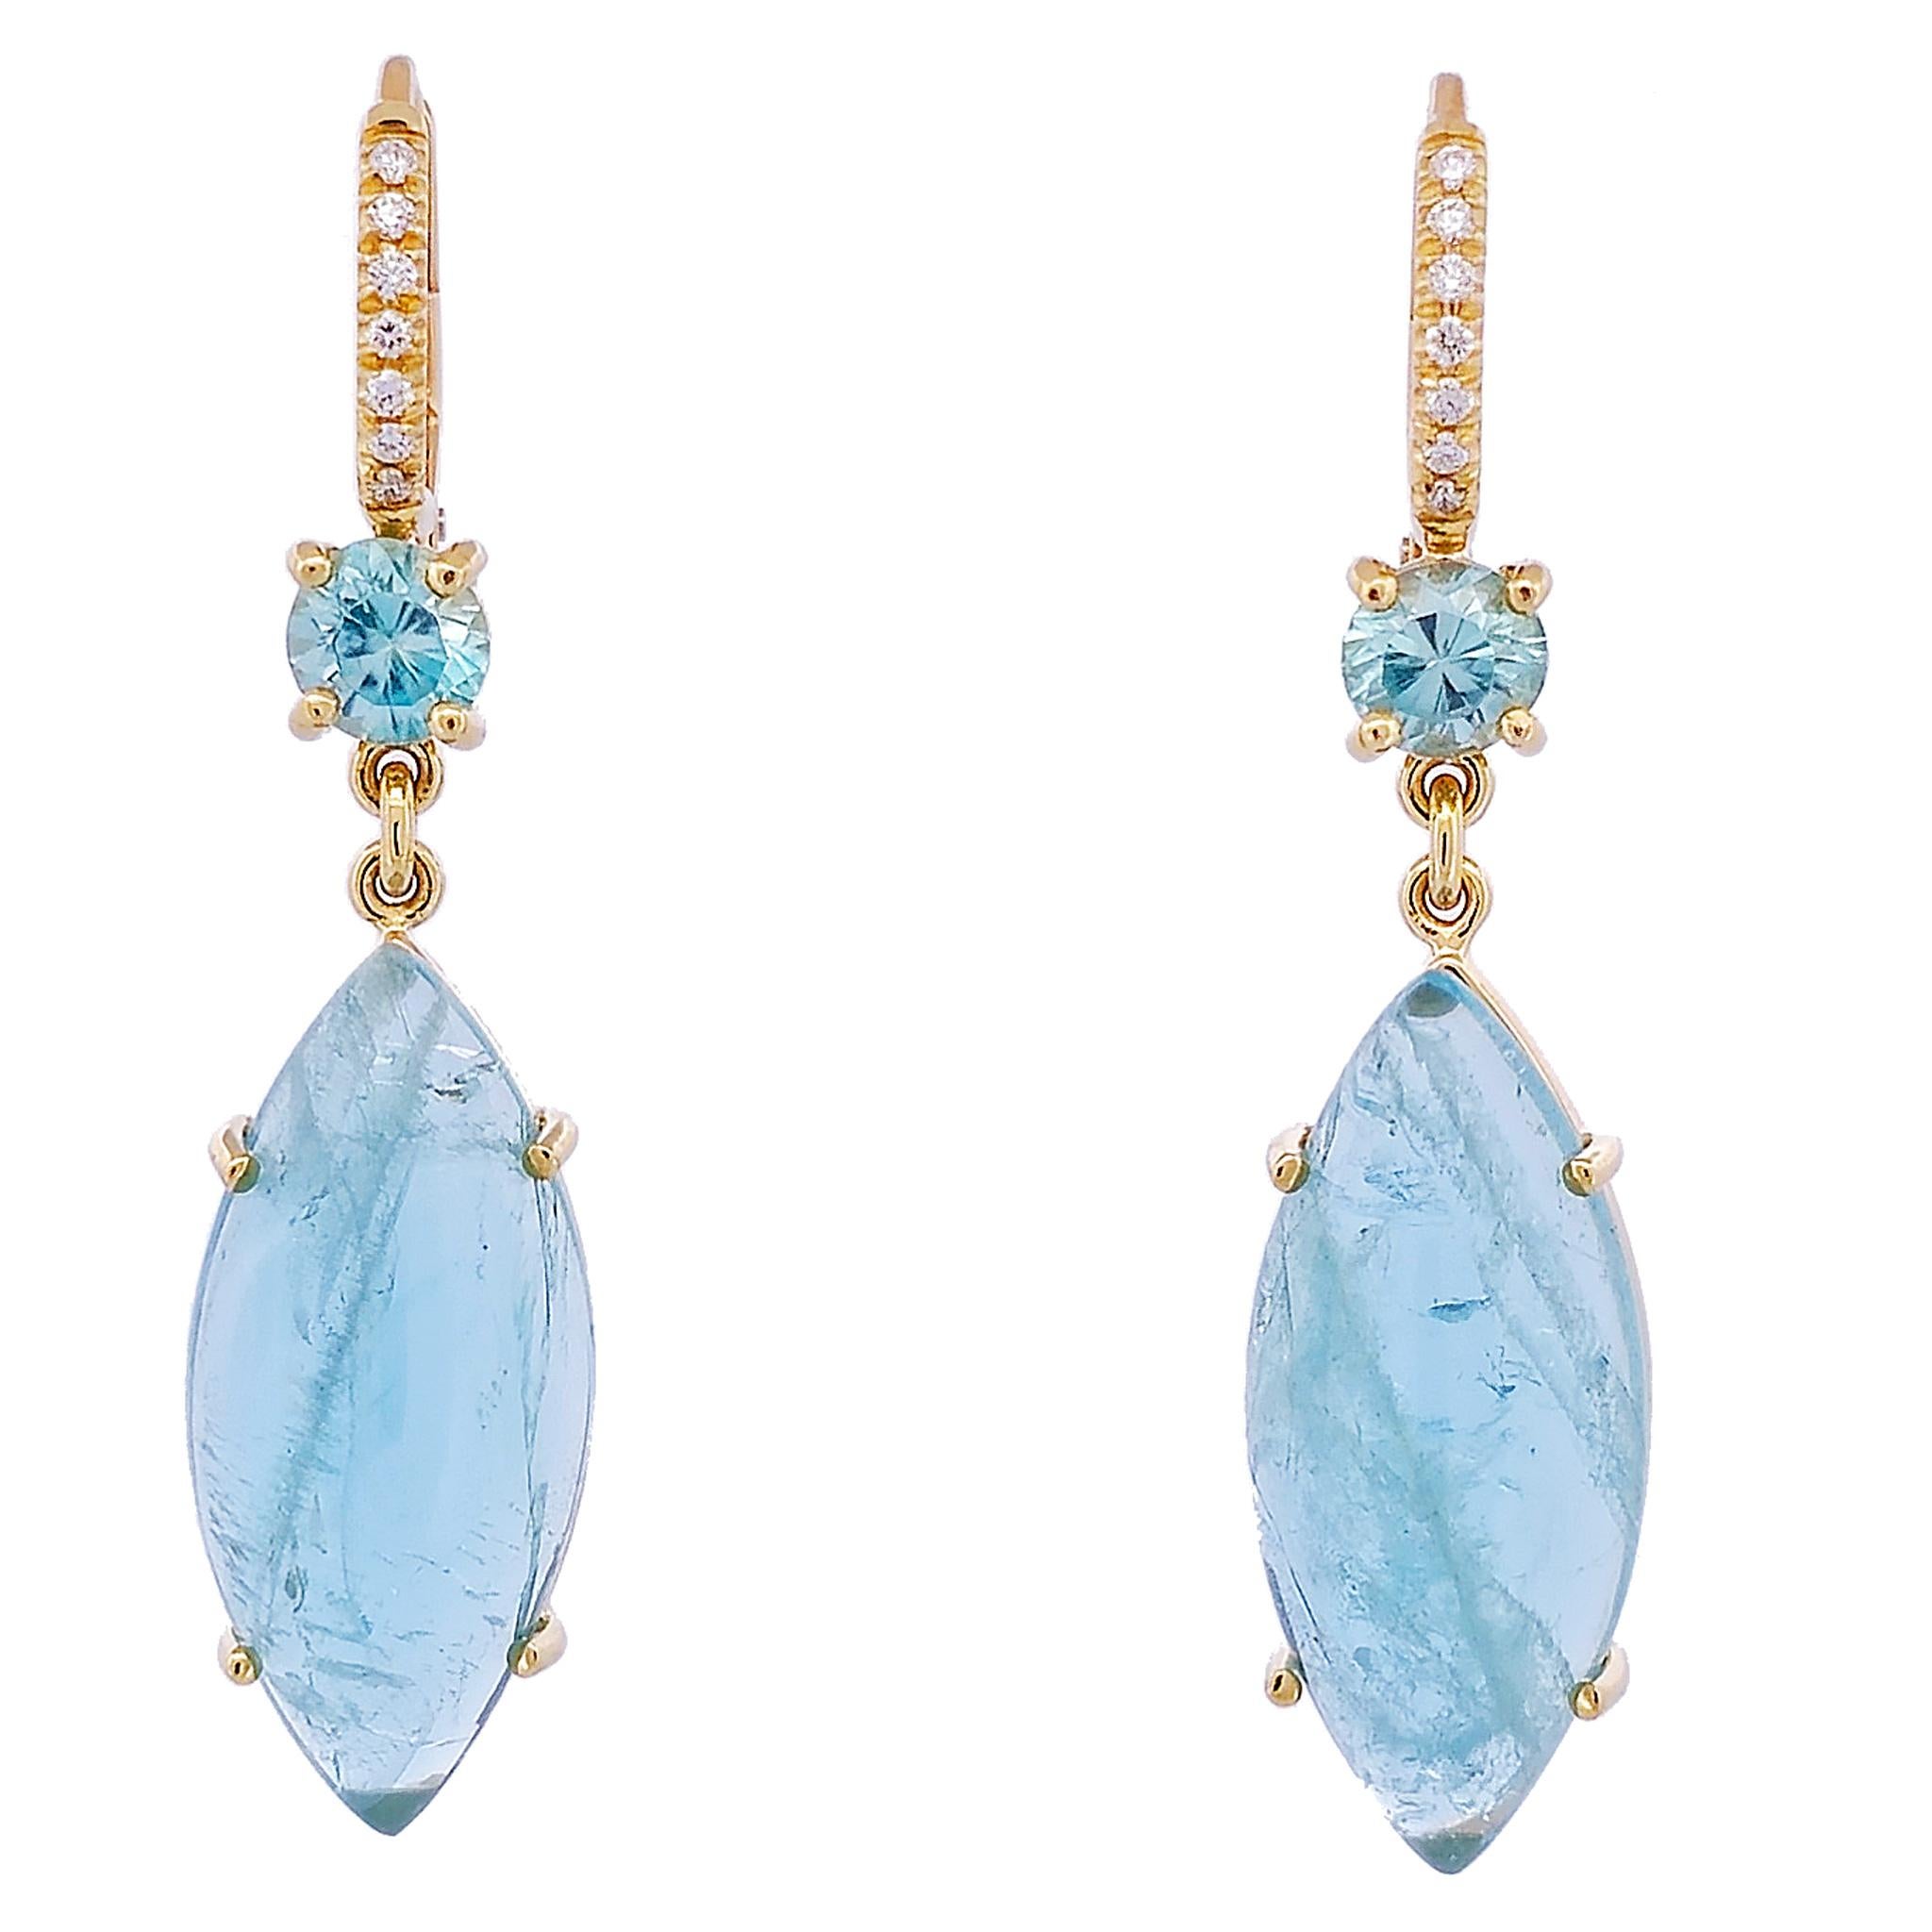 Exquisitely appointed Natural Aquamarine Cabochons Earrings, crafted with marquise cut cabochons in their natural color, feature two prong-set blue zircons weighing a total of 1.65 carats and are graced further by fourteen brilliant F/G VS diamonds,